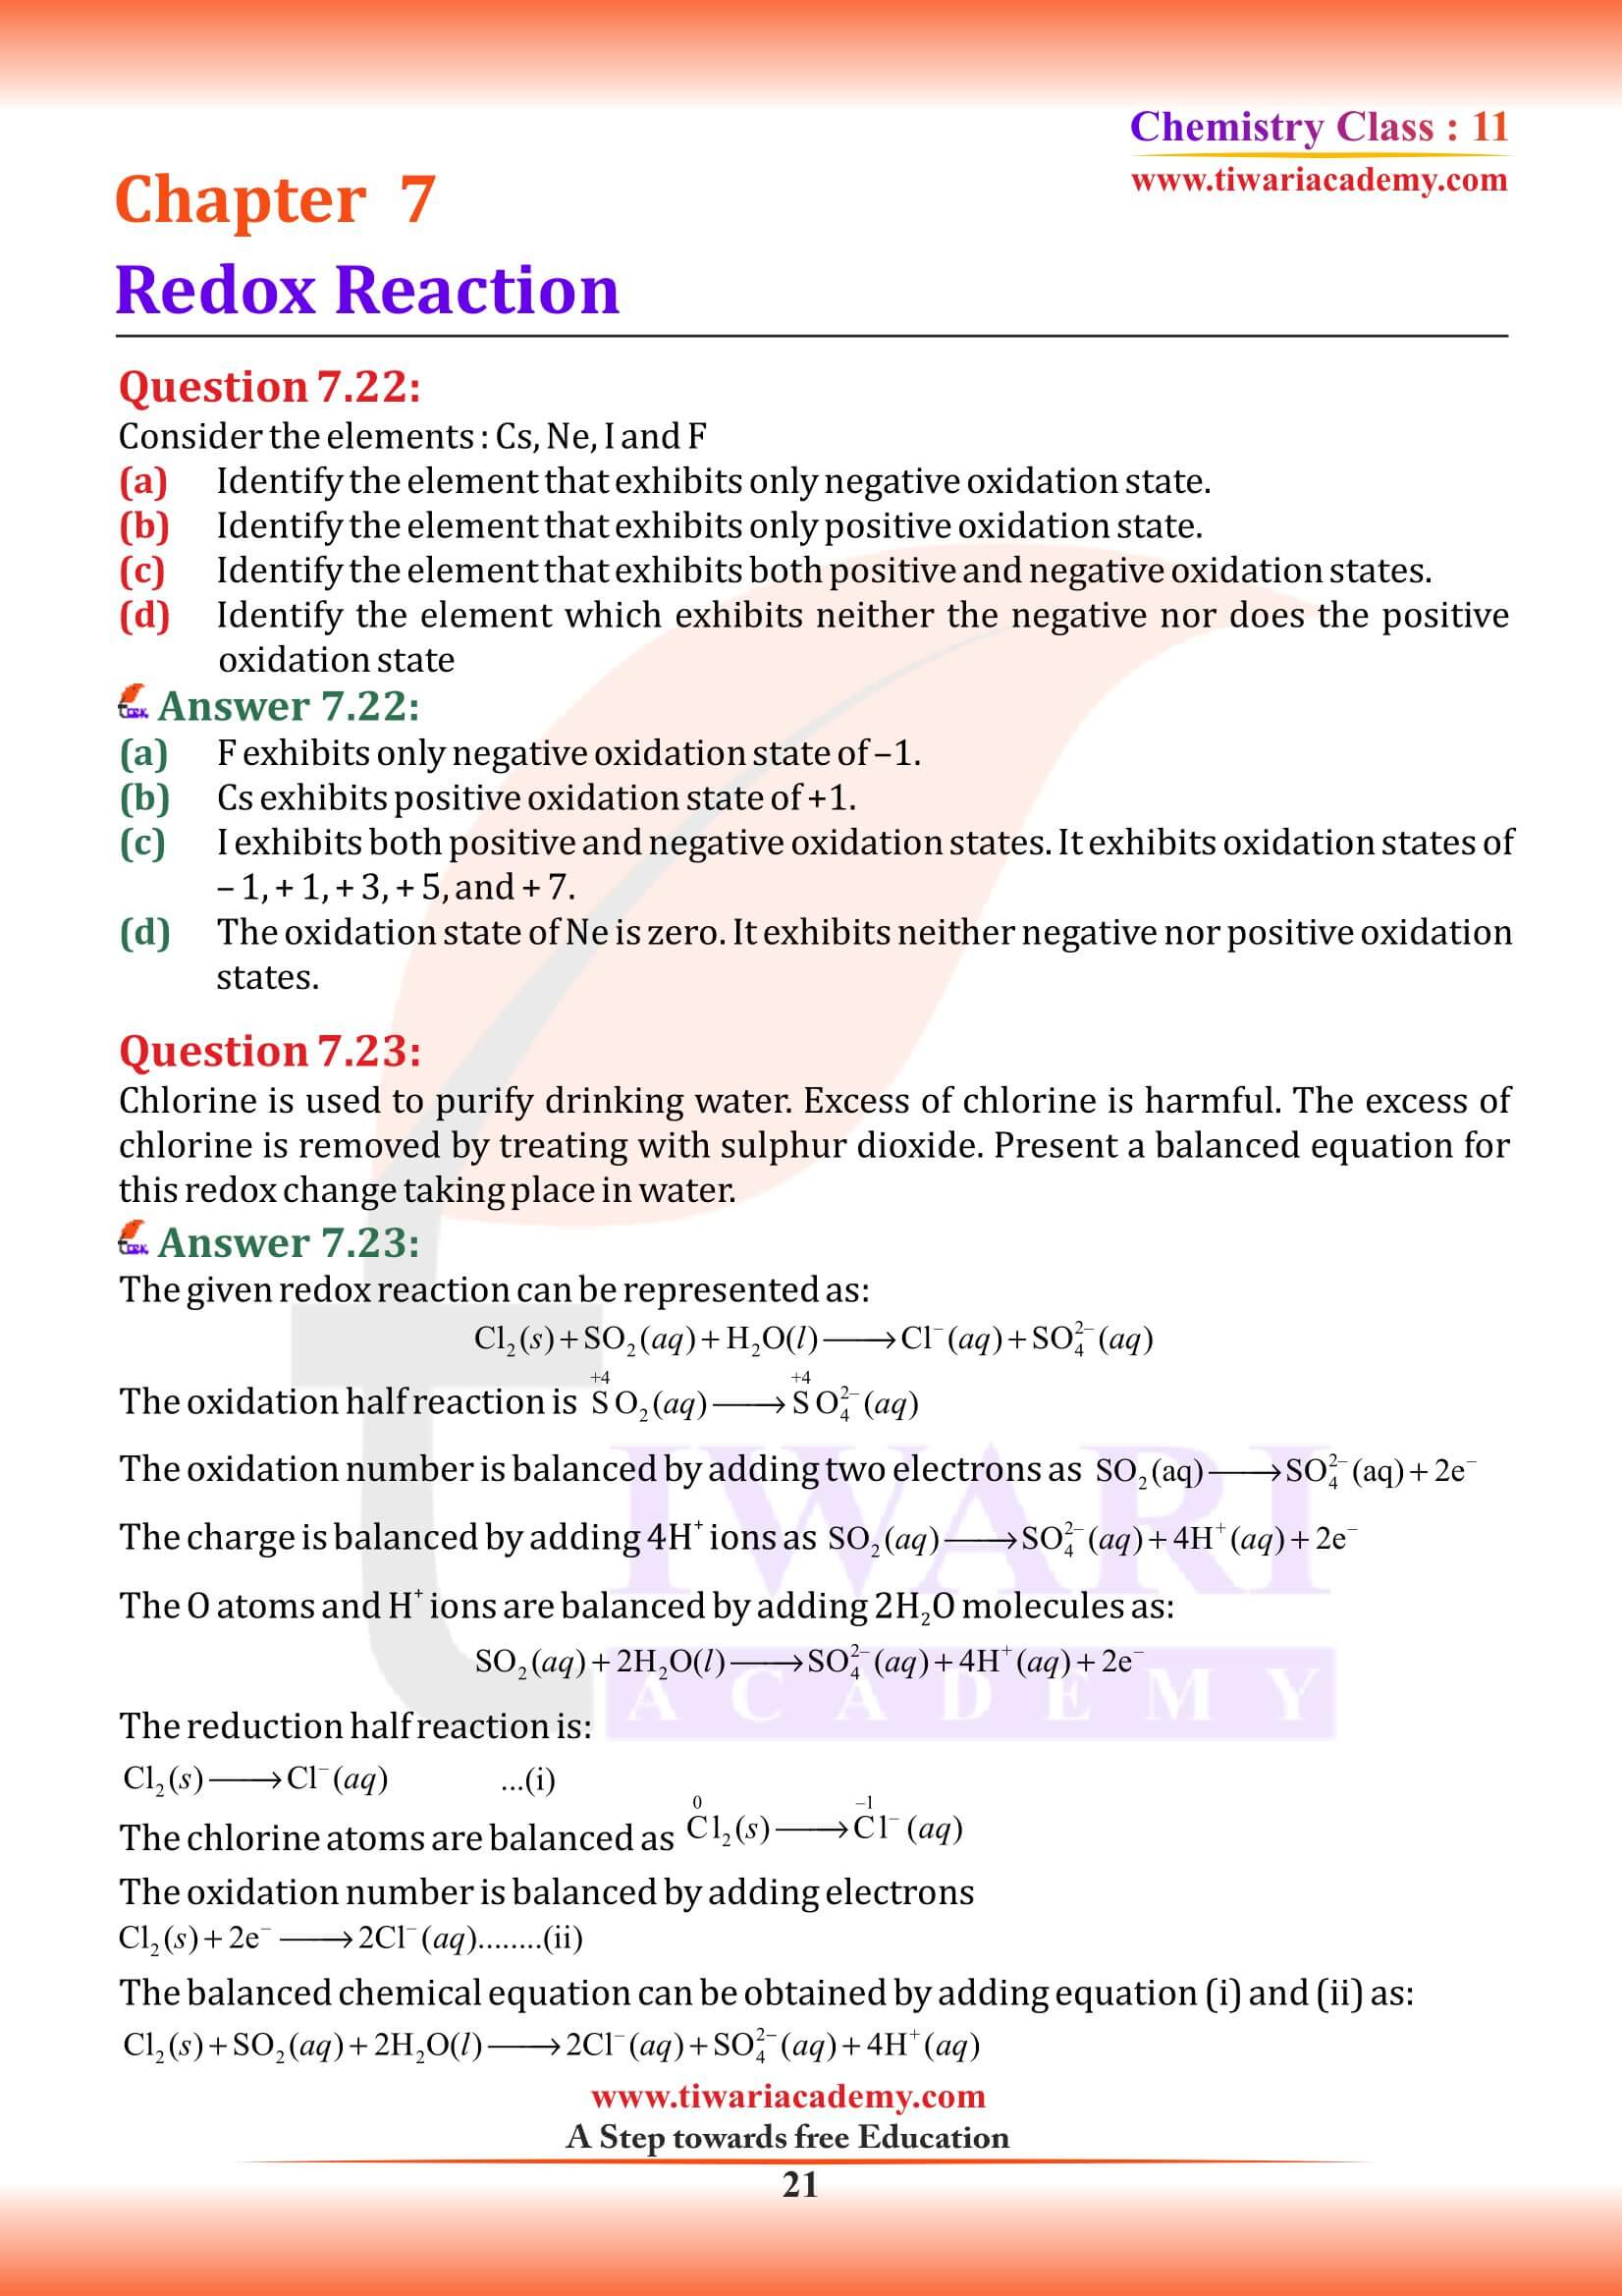 Class 11 Chemistry Chapter 7 guide answers